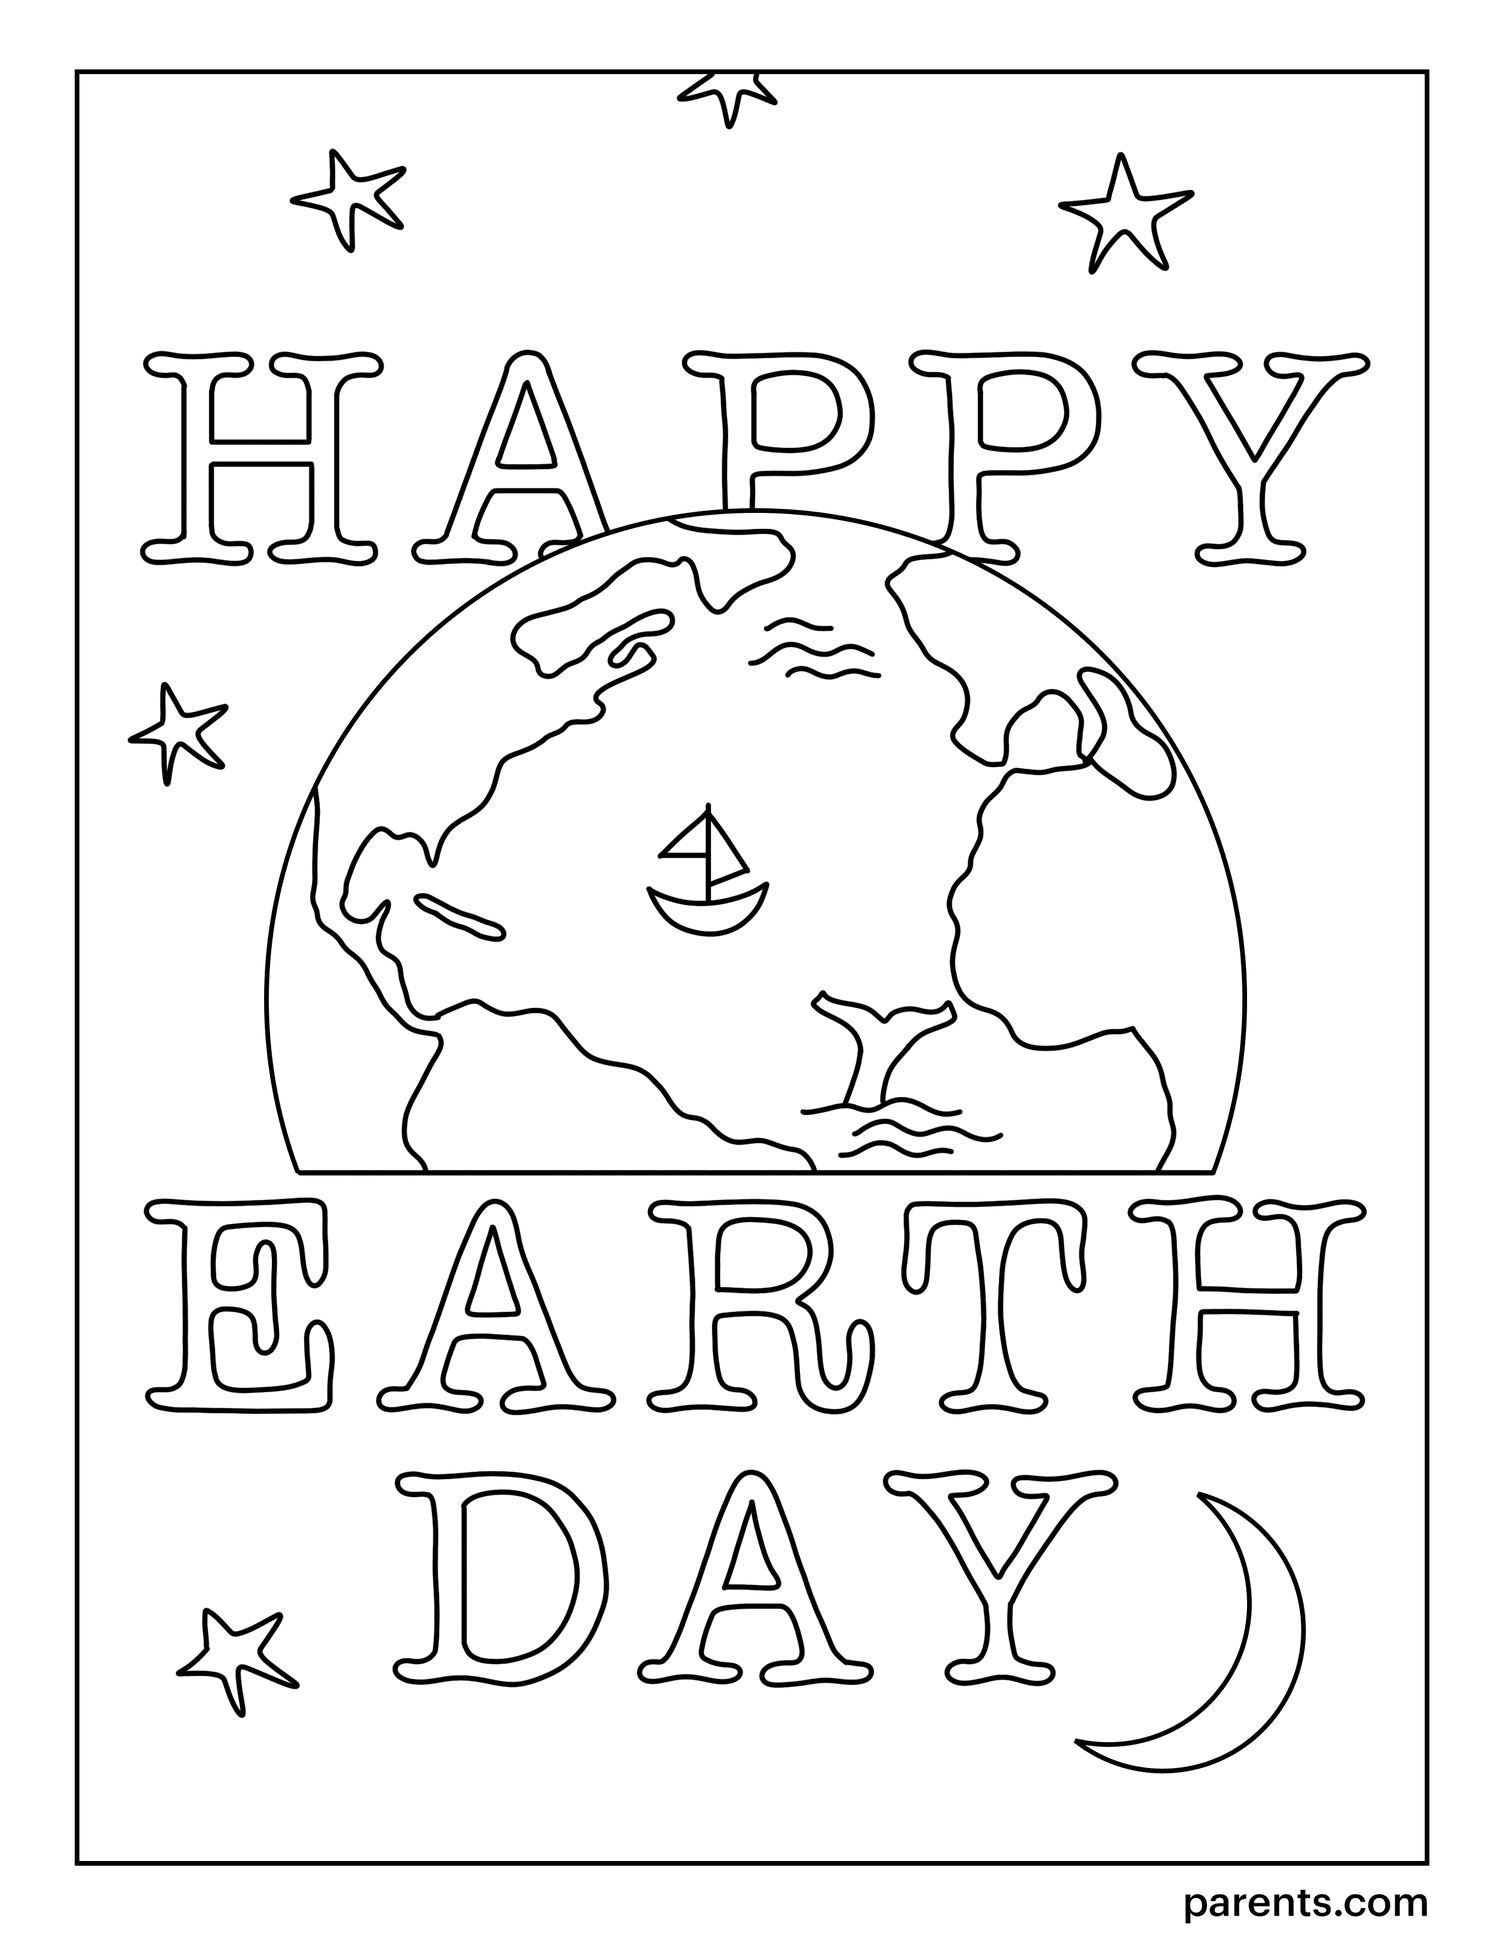 10-free-earth-day-coloring-pages-for-kids-parents